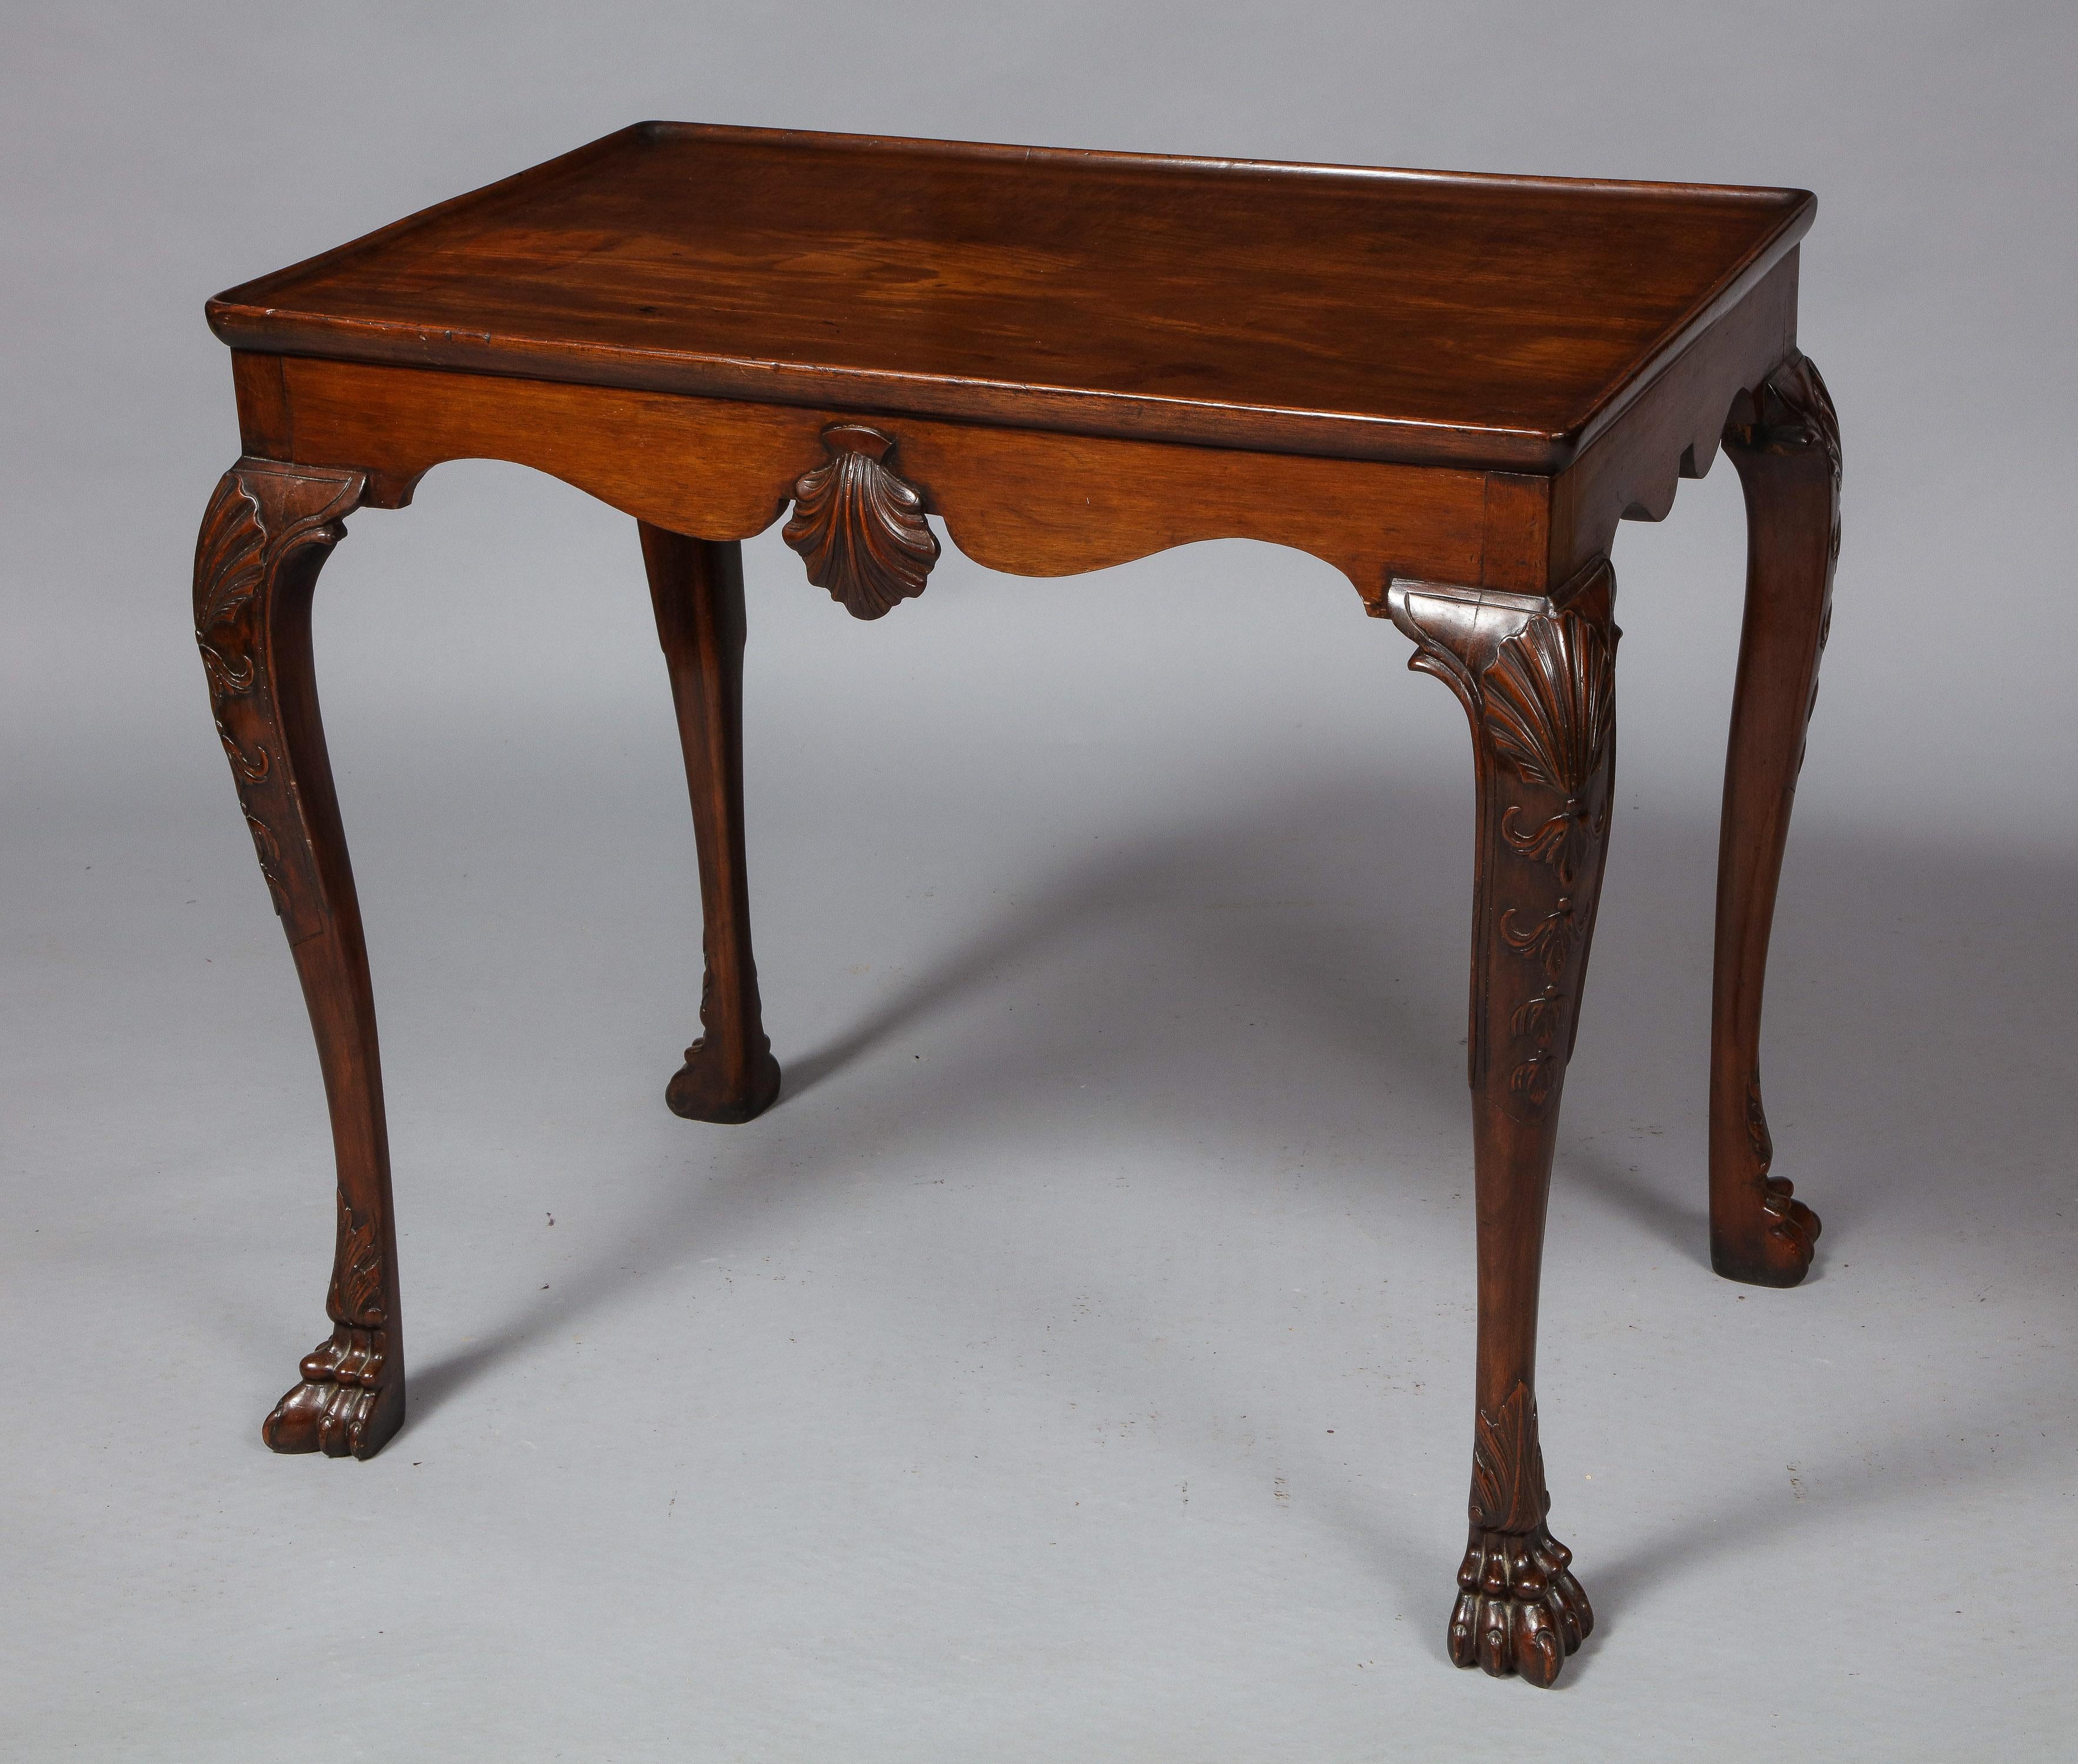 Very fine Irish mahogany tea table, the dished top with molded edge over scalloped apron, the two long sides with richly carved scallop shells and standing on cabriole legs with shell carved knees and ending in lion paw feet, the whole with good